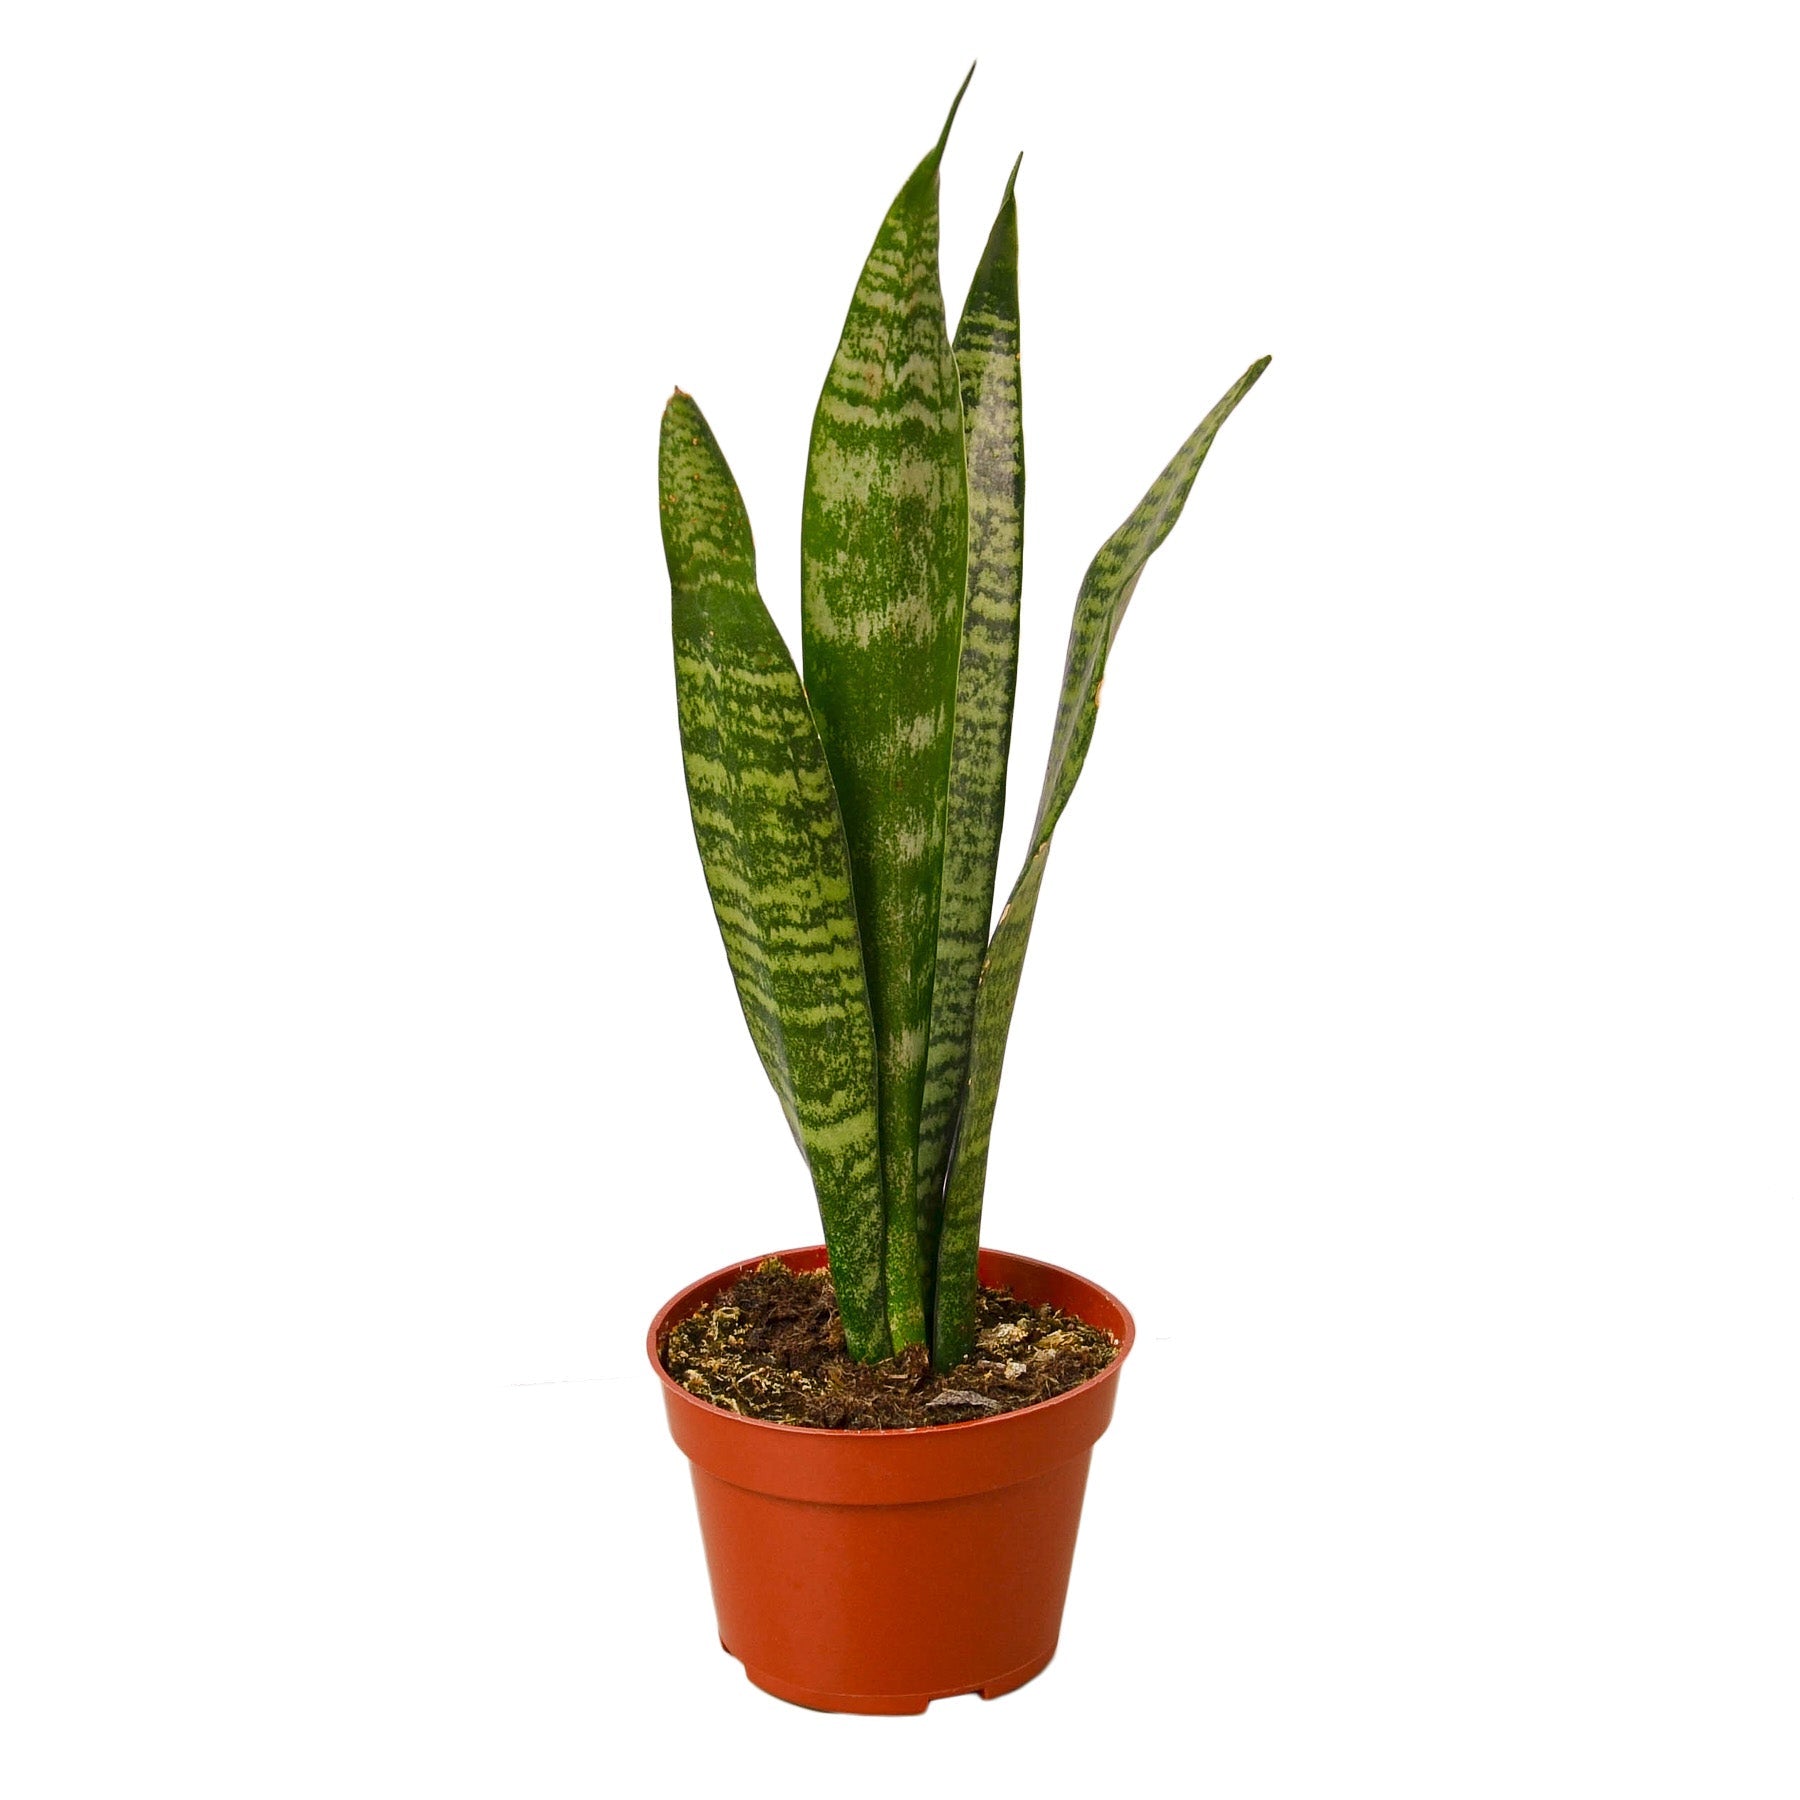 A snake plant in a pot.